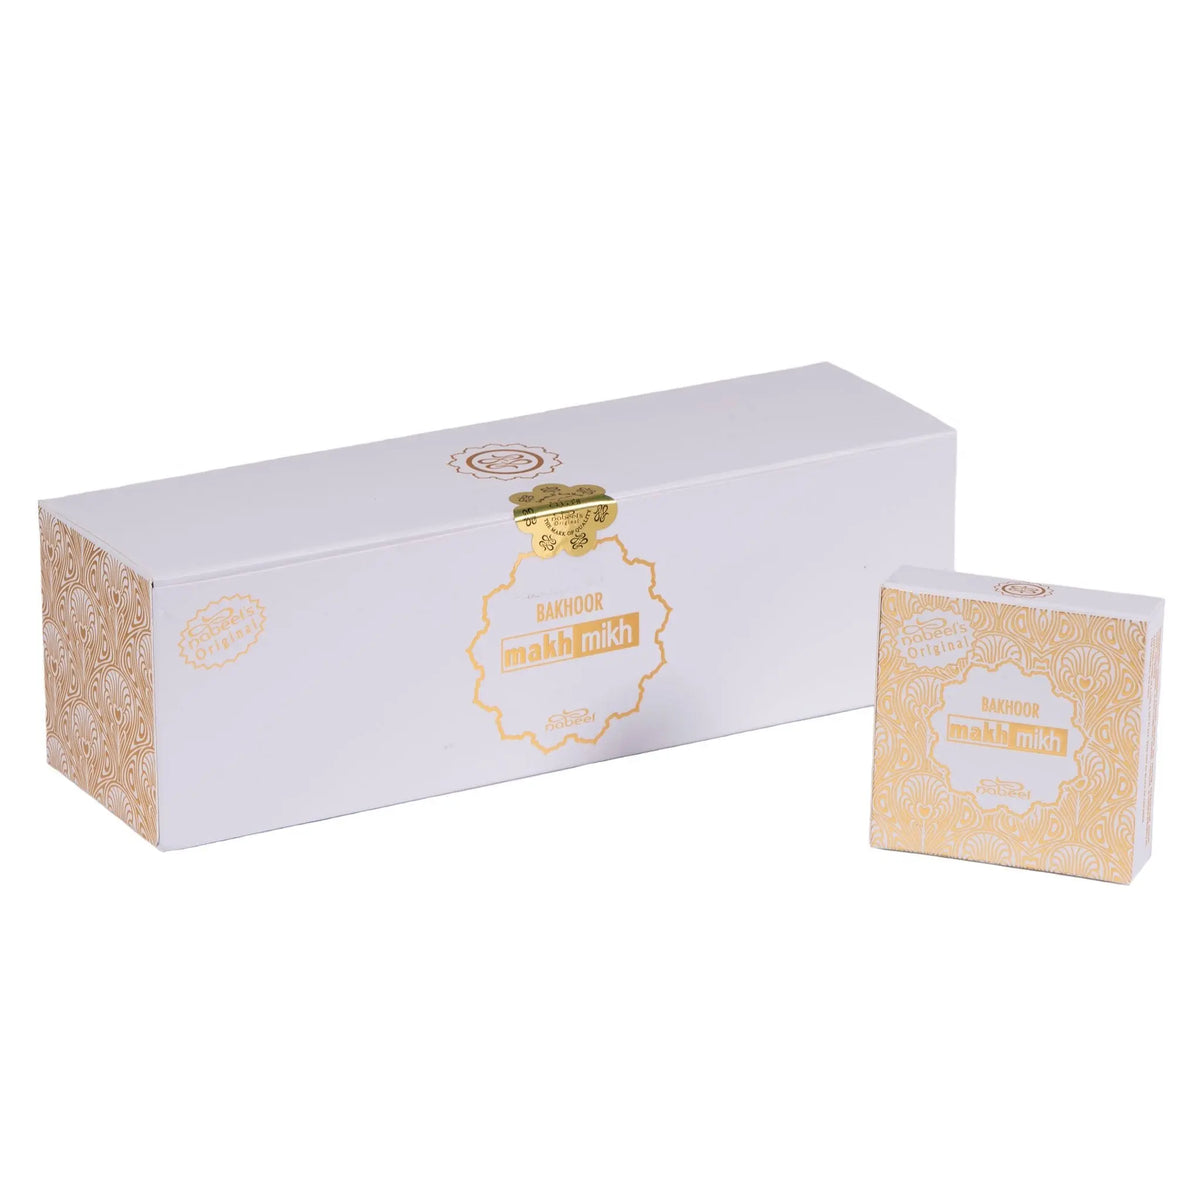 An elegant product packaging set for "Bakhoor Makh Mikh" by Nabeel Perfumes. The set includes a long, rectangular box and a smaller square box, both with a pristine white background and embellished with golden ornamental patterns. The central feature on both boxes is an intricate, golden label that reads "BAKHOOR makh mikh" in stylized lettering. The label's border has a decorative, lace-like design, adding a touch of opulence to the packaging.